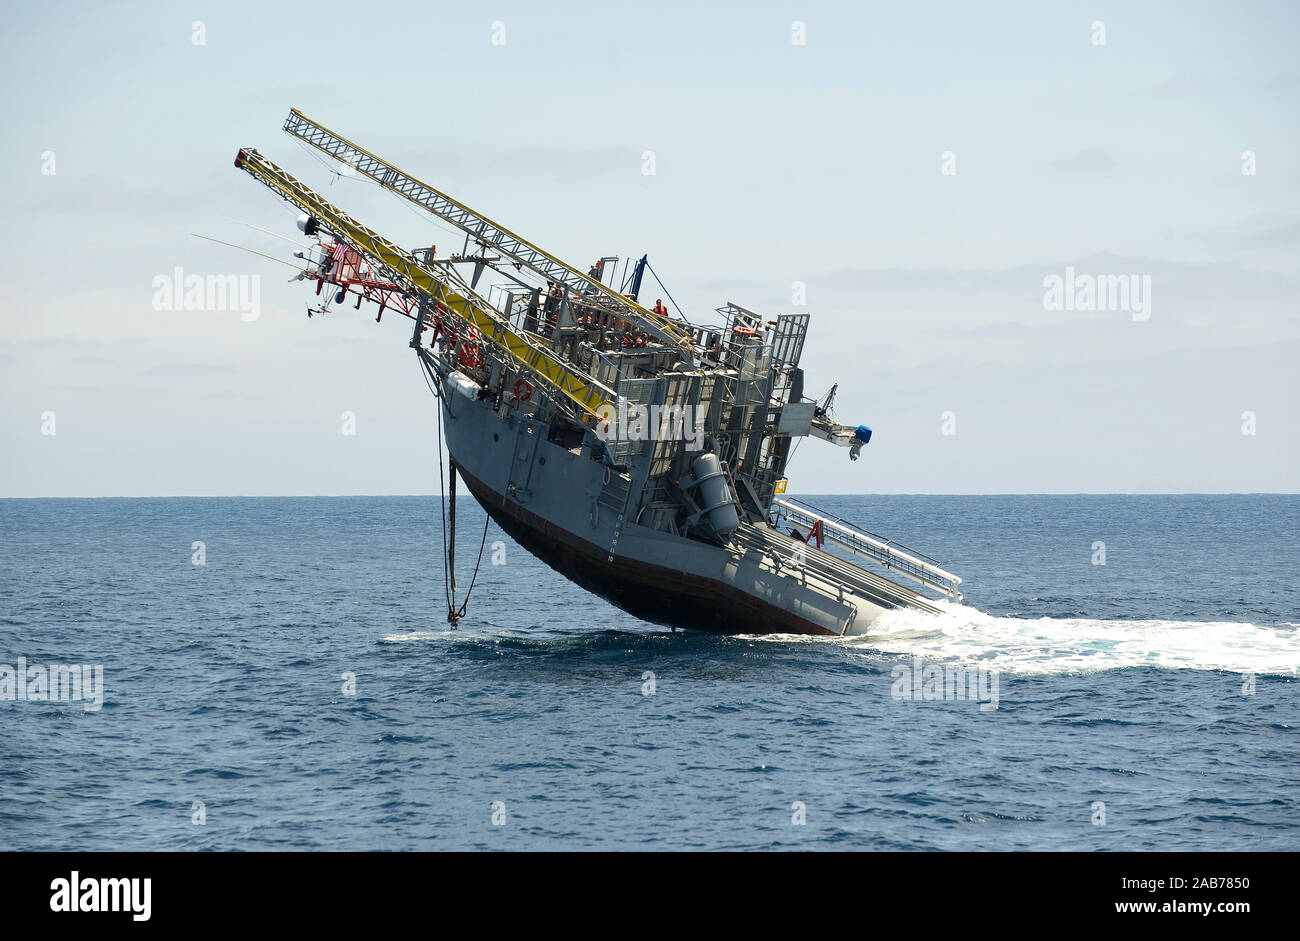 (Jun. 30, 2012) The Department of the Navy's Floating Instrument Platform (FLIP) begins the process of transitioning from horizontal to vertical by filling ballast tanks in the stern during a cruise commemorating 50 years of continuous service to the scientific community Stock Photo